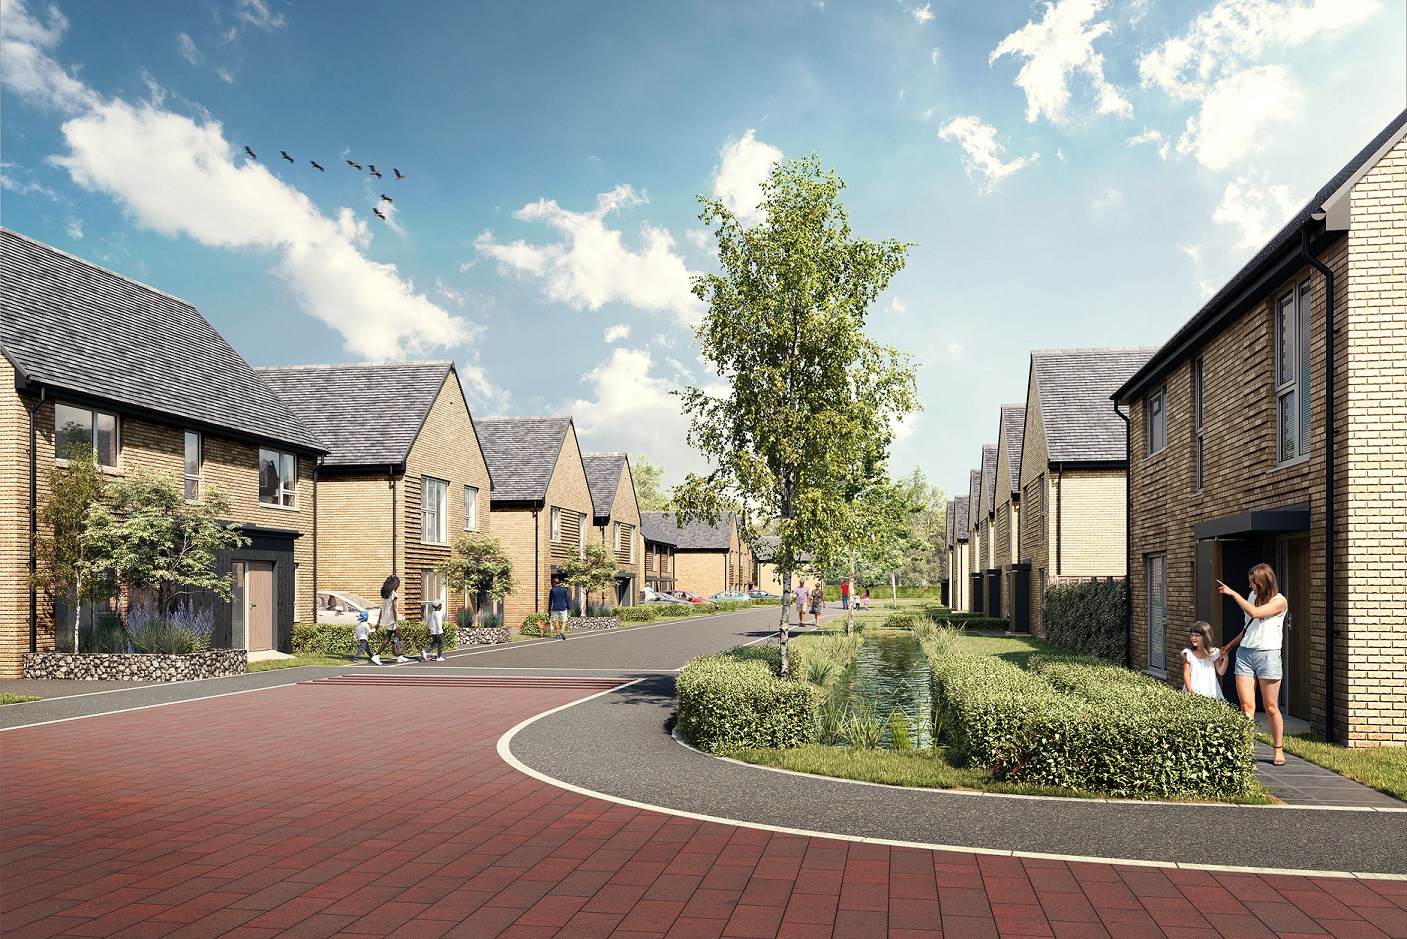 Public to have their say on plans for new sustainable family homes